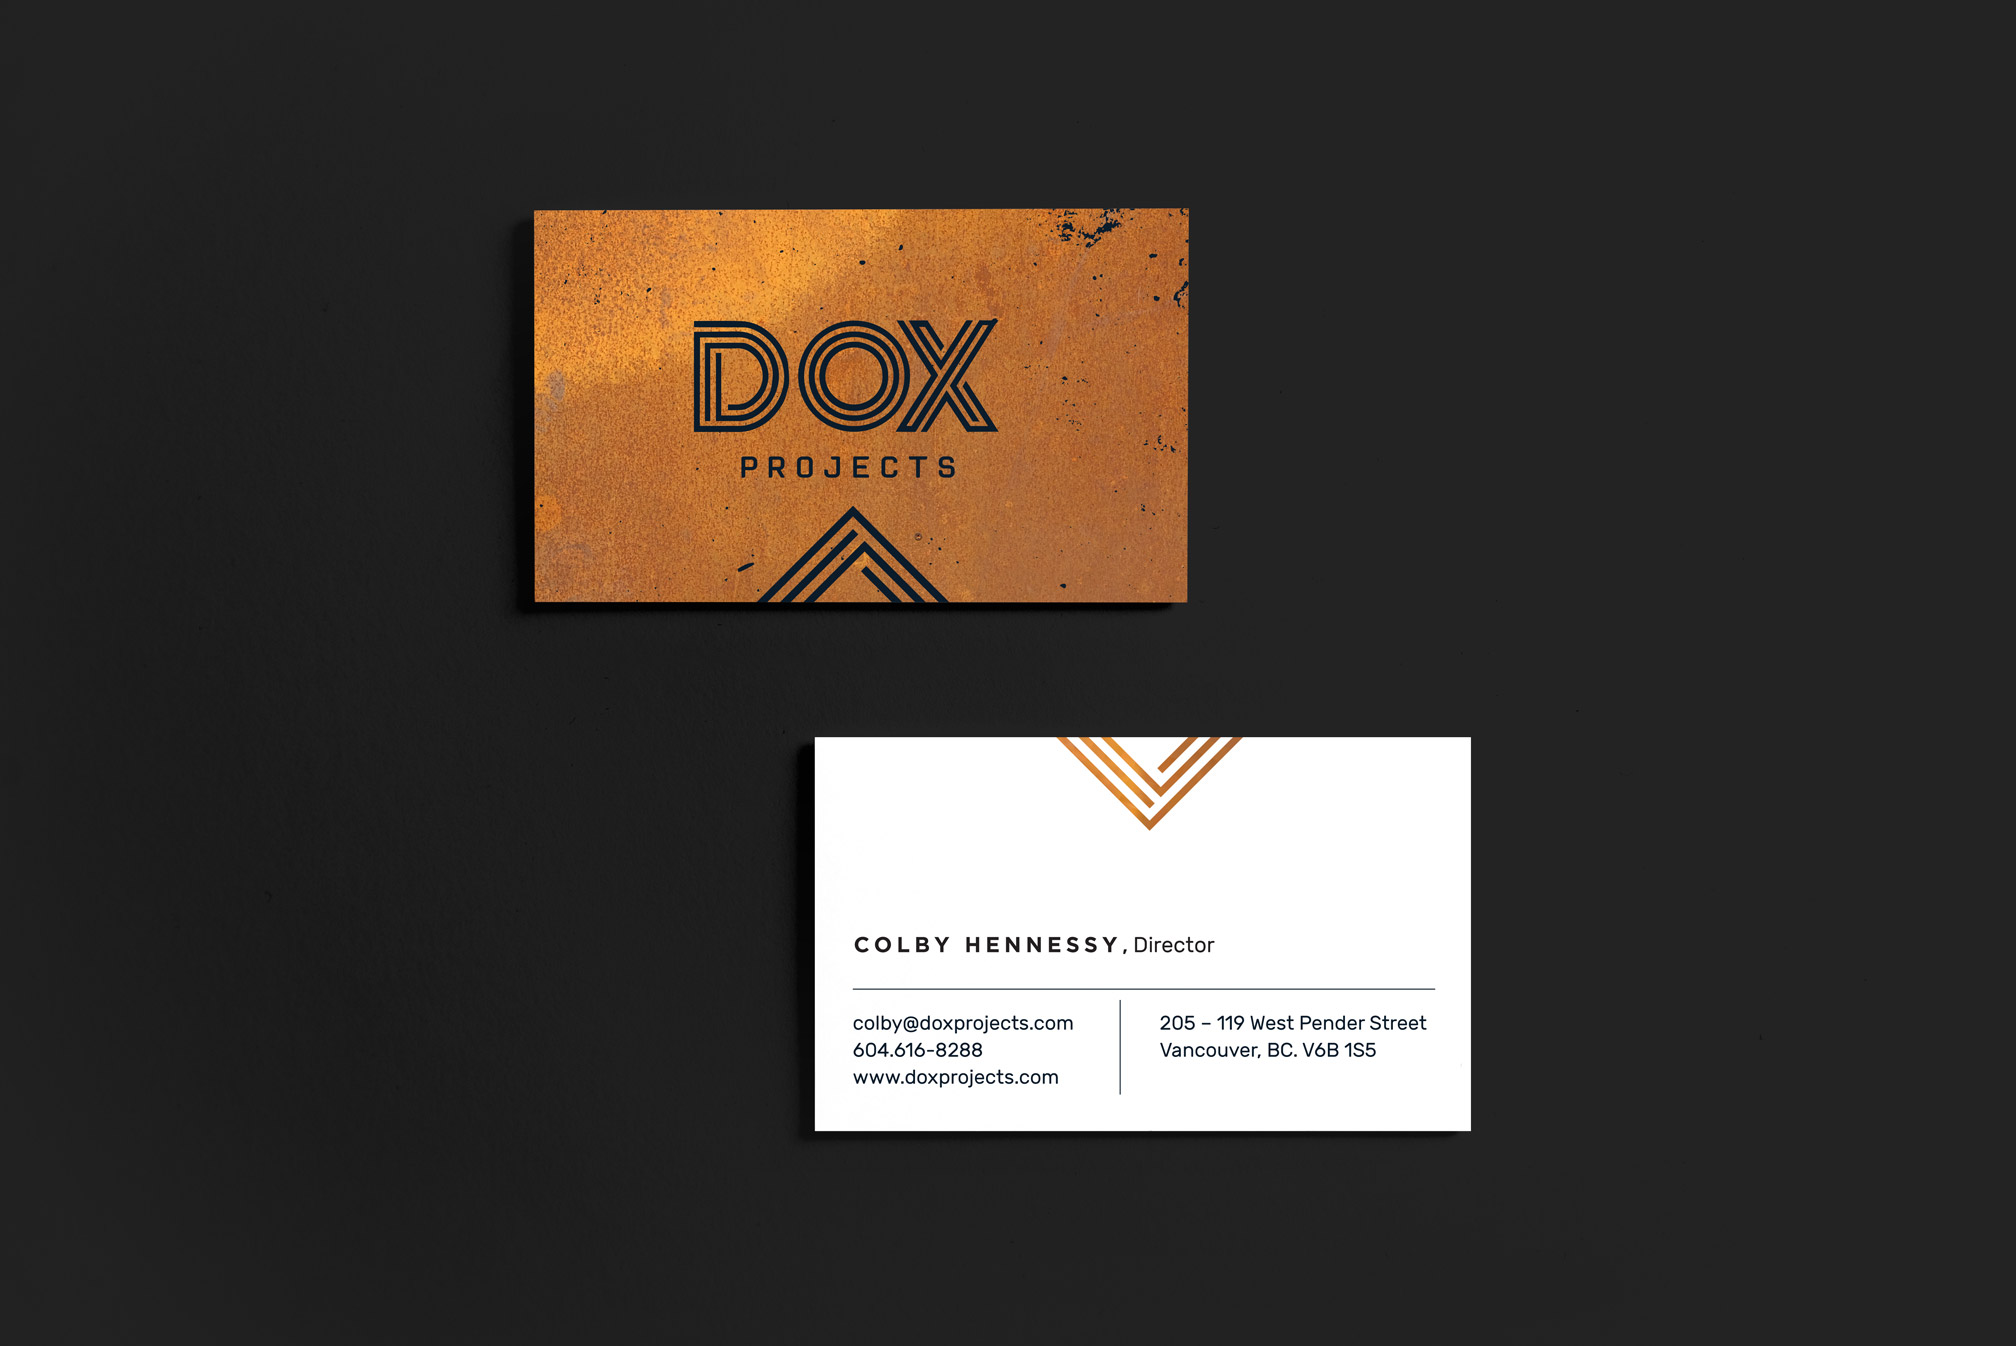 dox-projects-businesscards